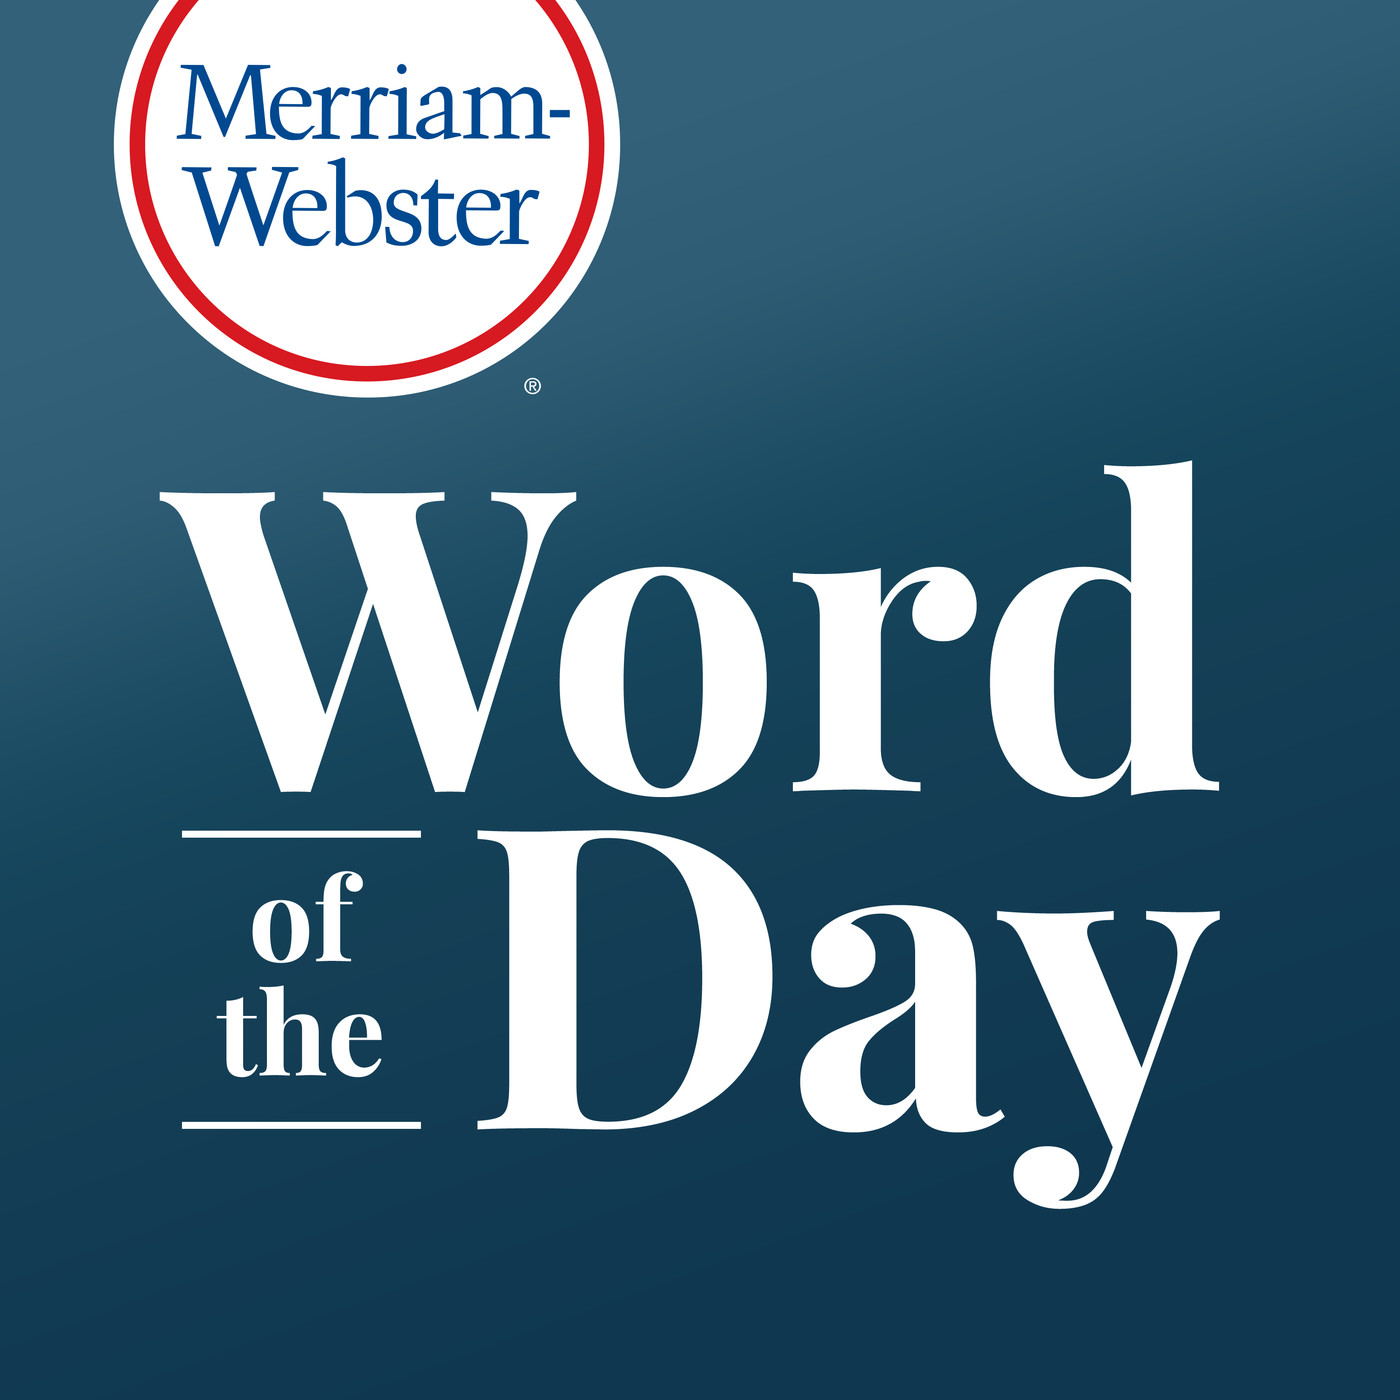 Winch Definition & Meaning - Merriam-Webster